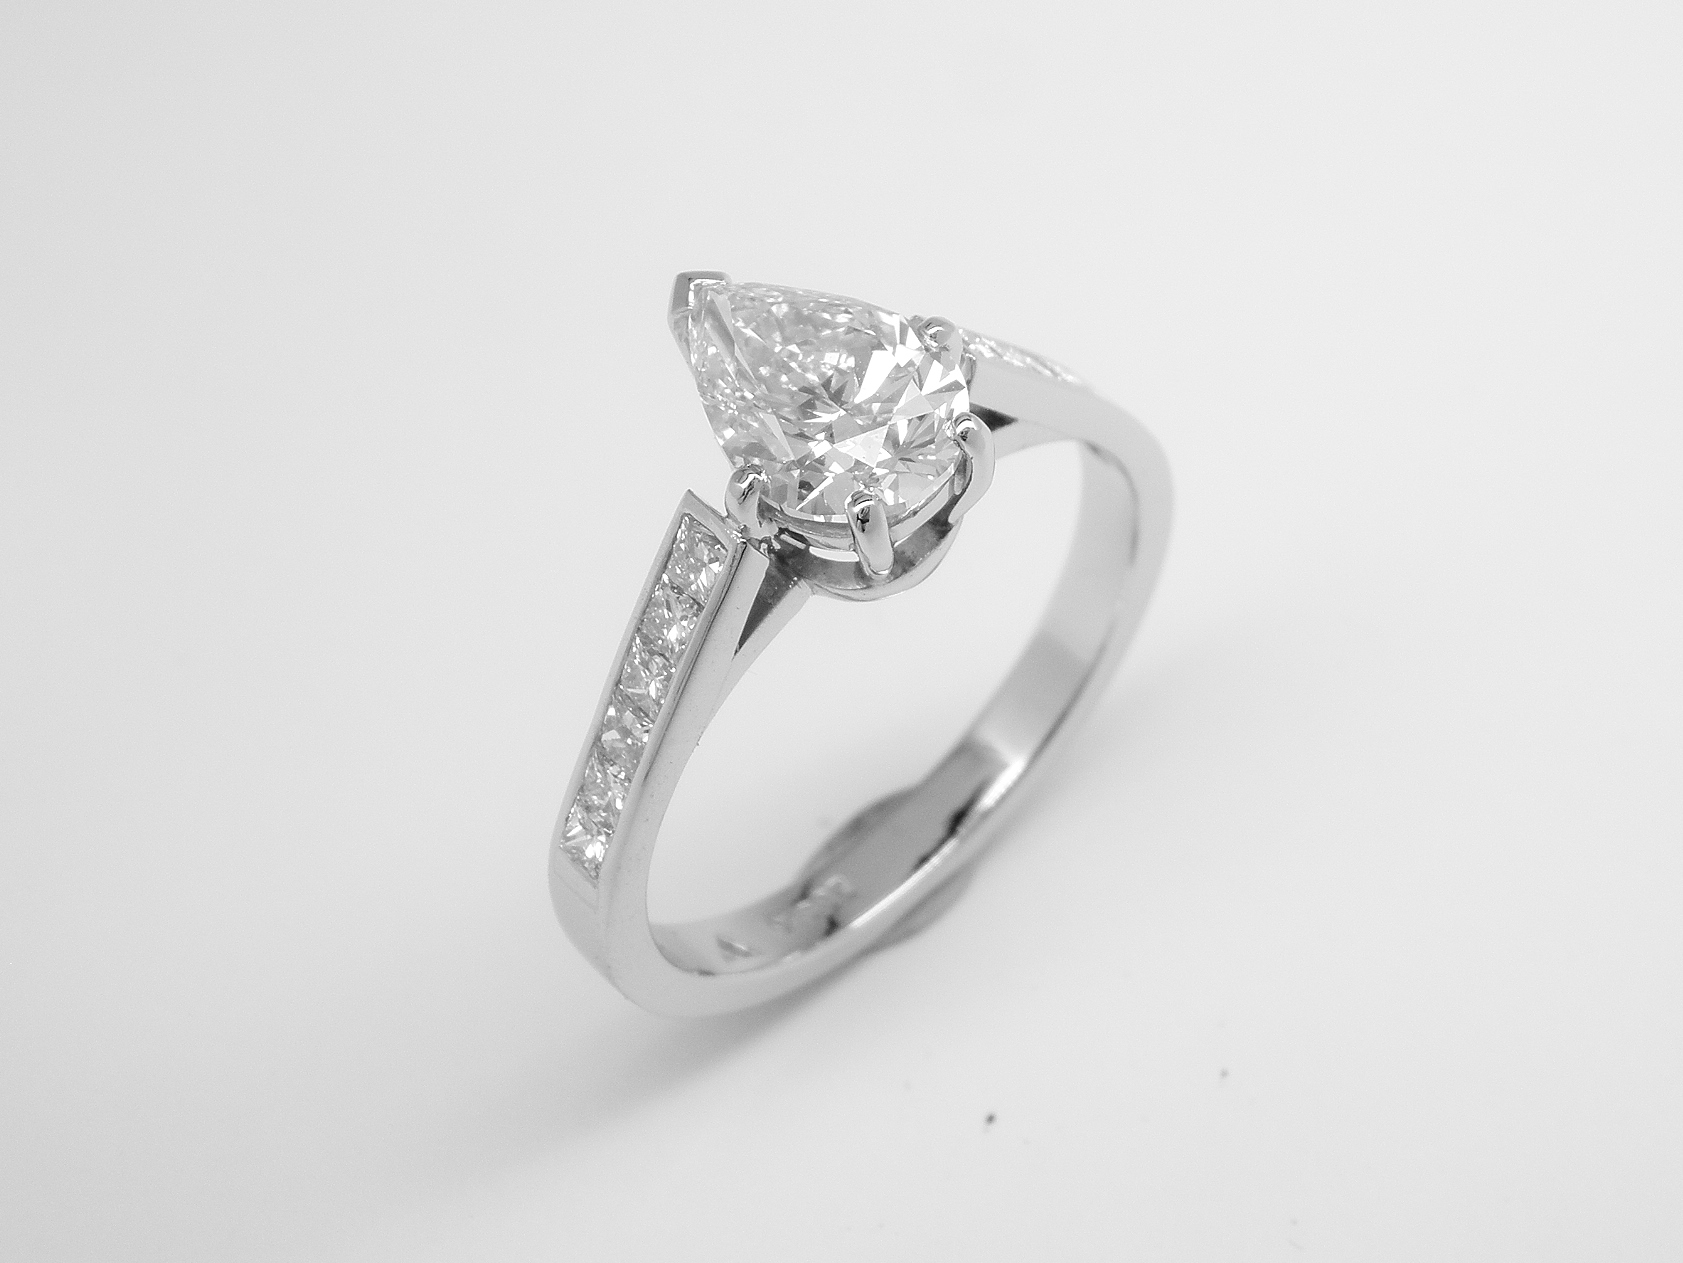 A single stone pear shaped diamond engagement ring mounted in platinum with 6 princess cut diamonds channel set in each shoulder.